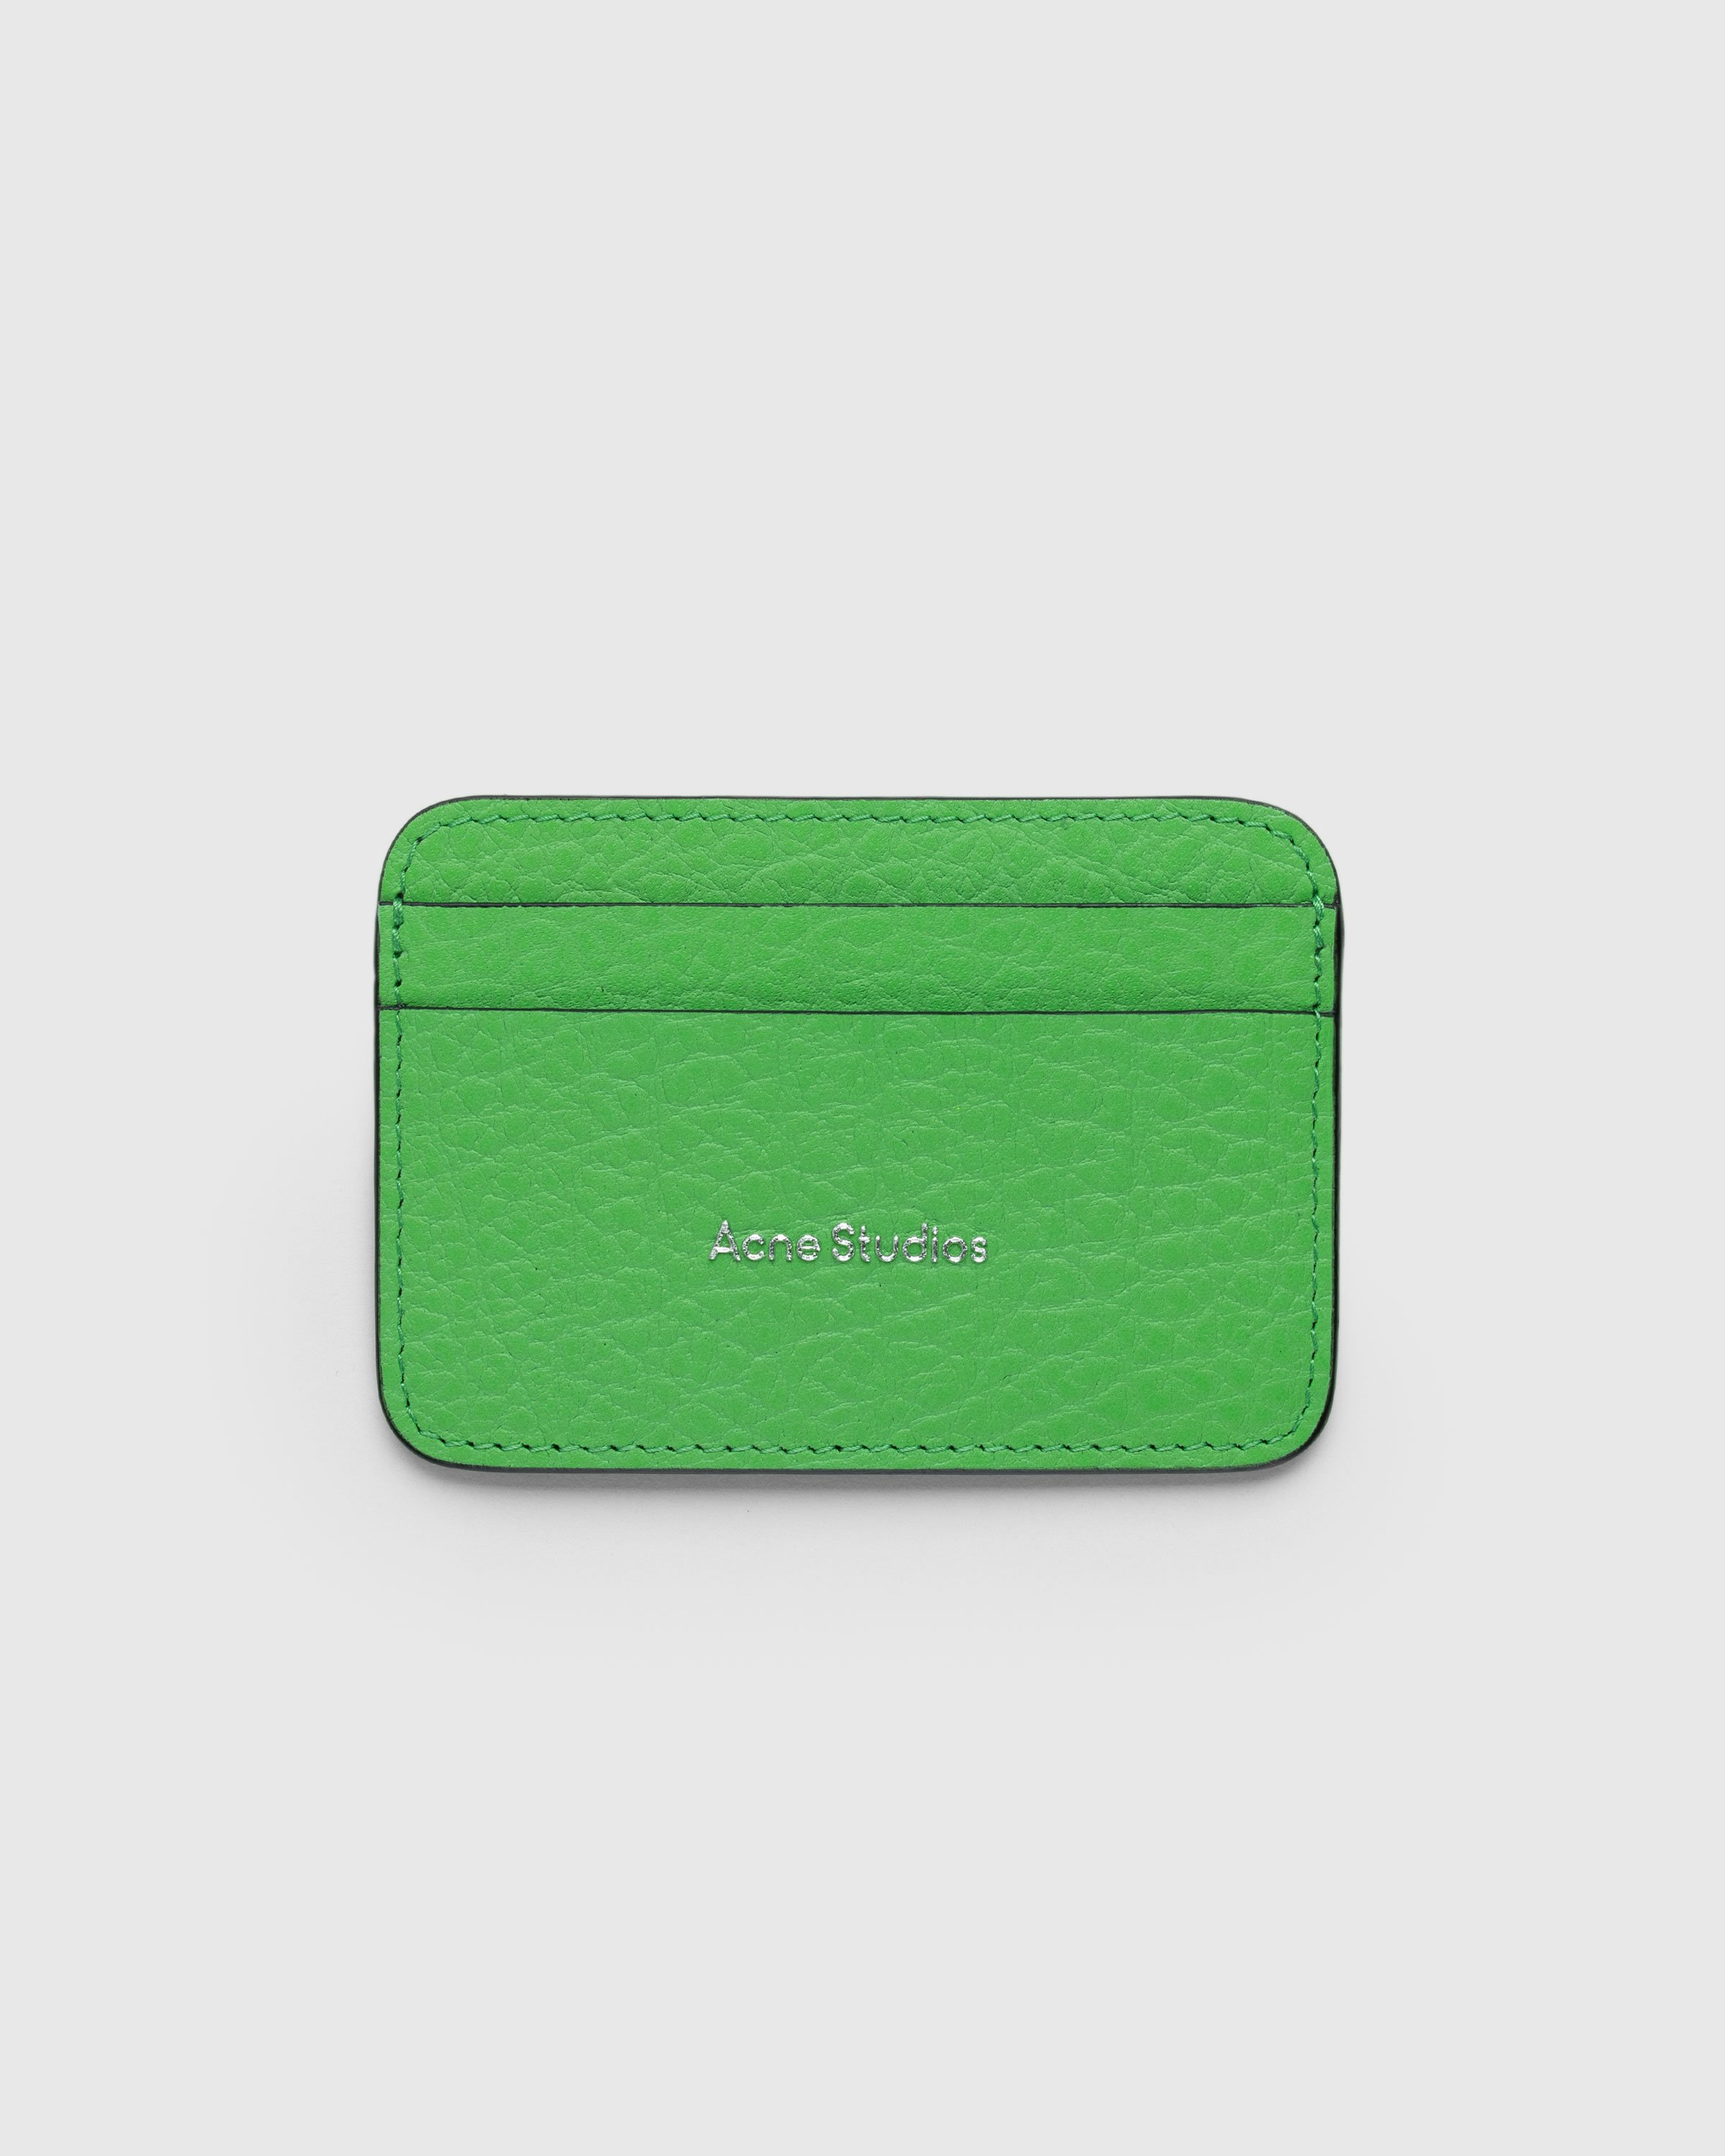 Acne Studios - FN-UX-SLGS000275 GREEN - Accessories - Green - Image 1